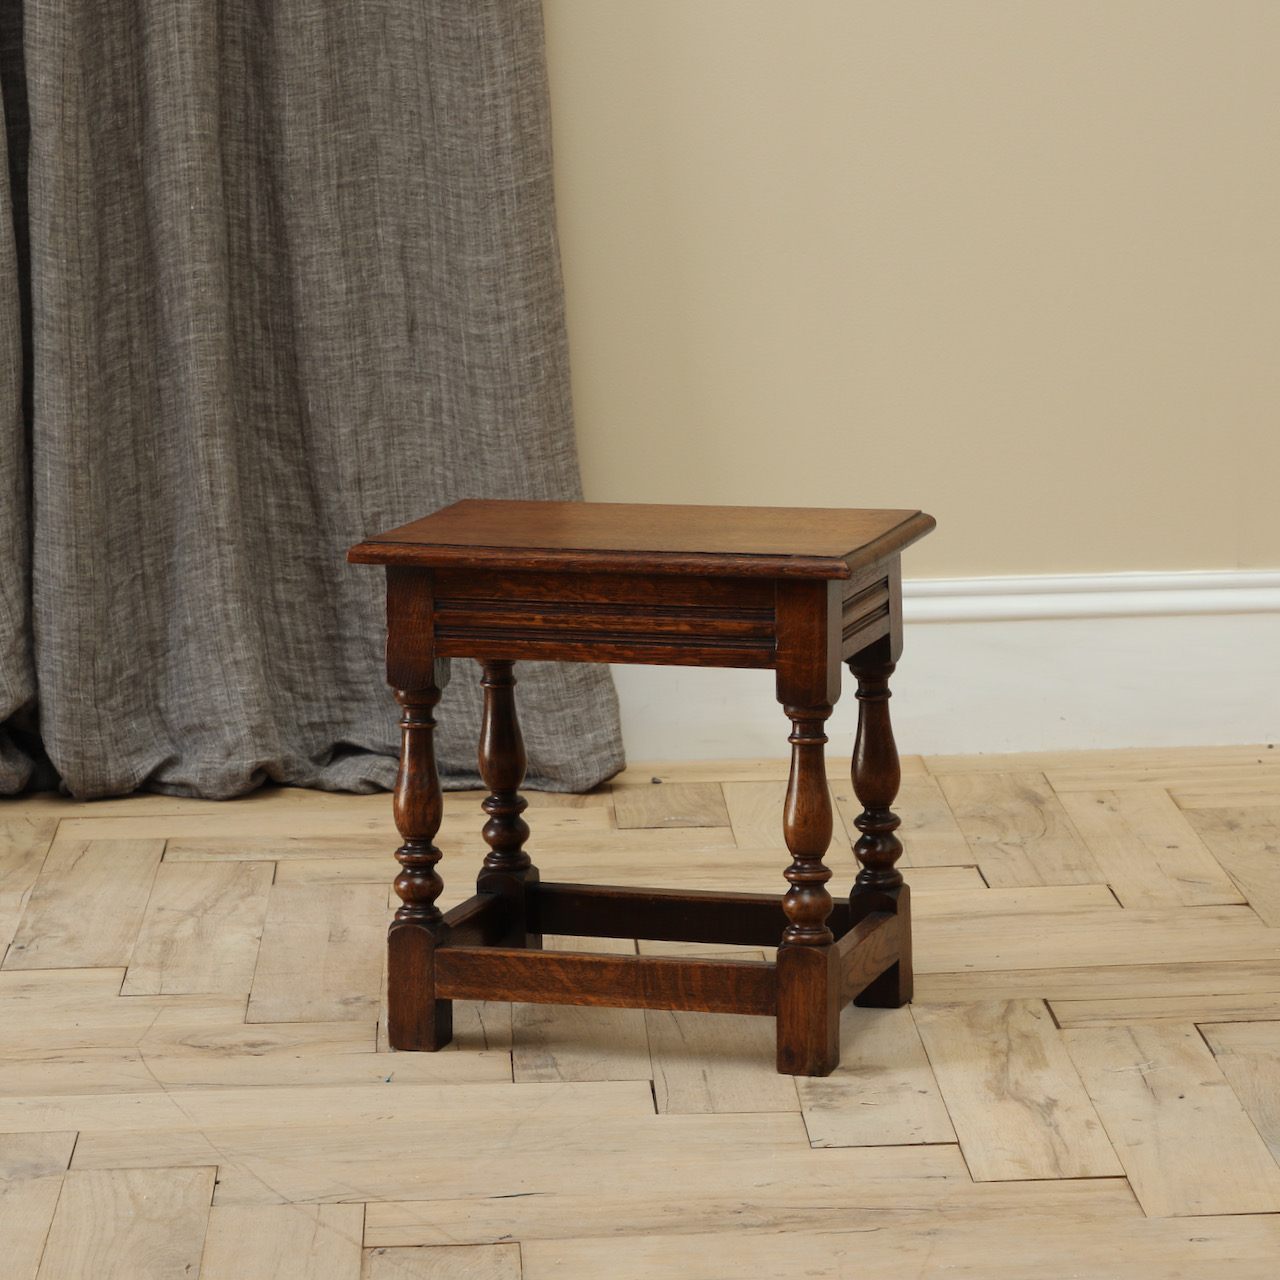 131-93 - Jointed Stool